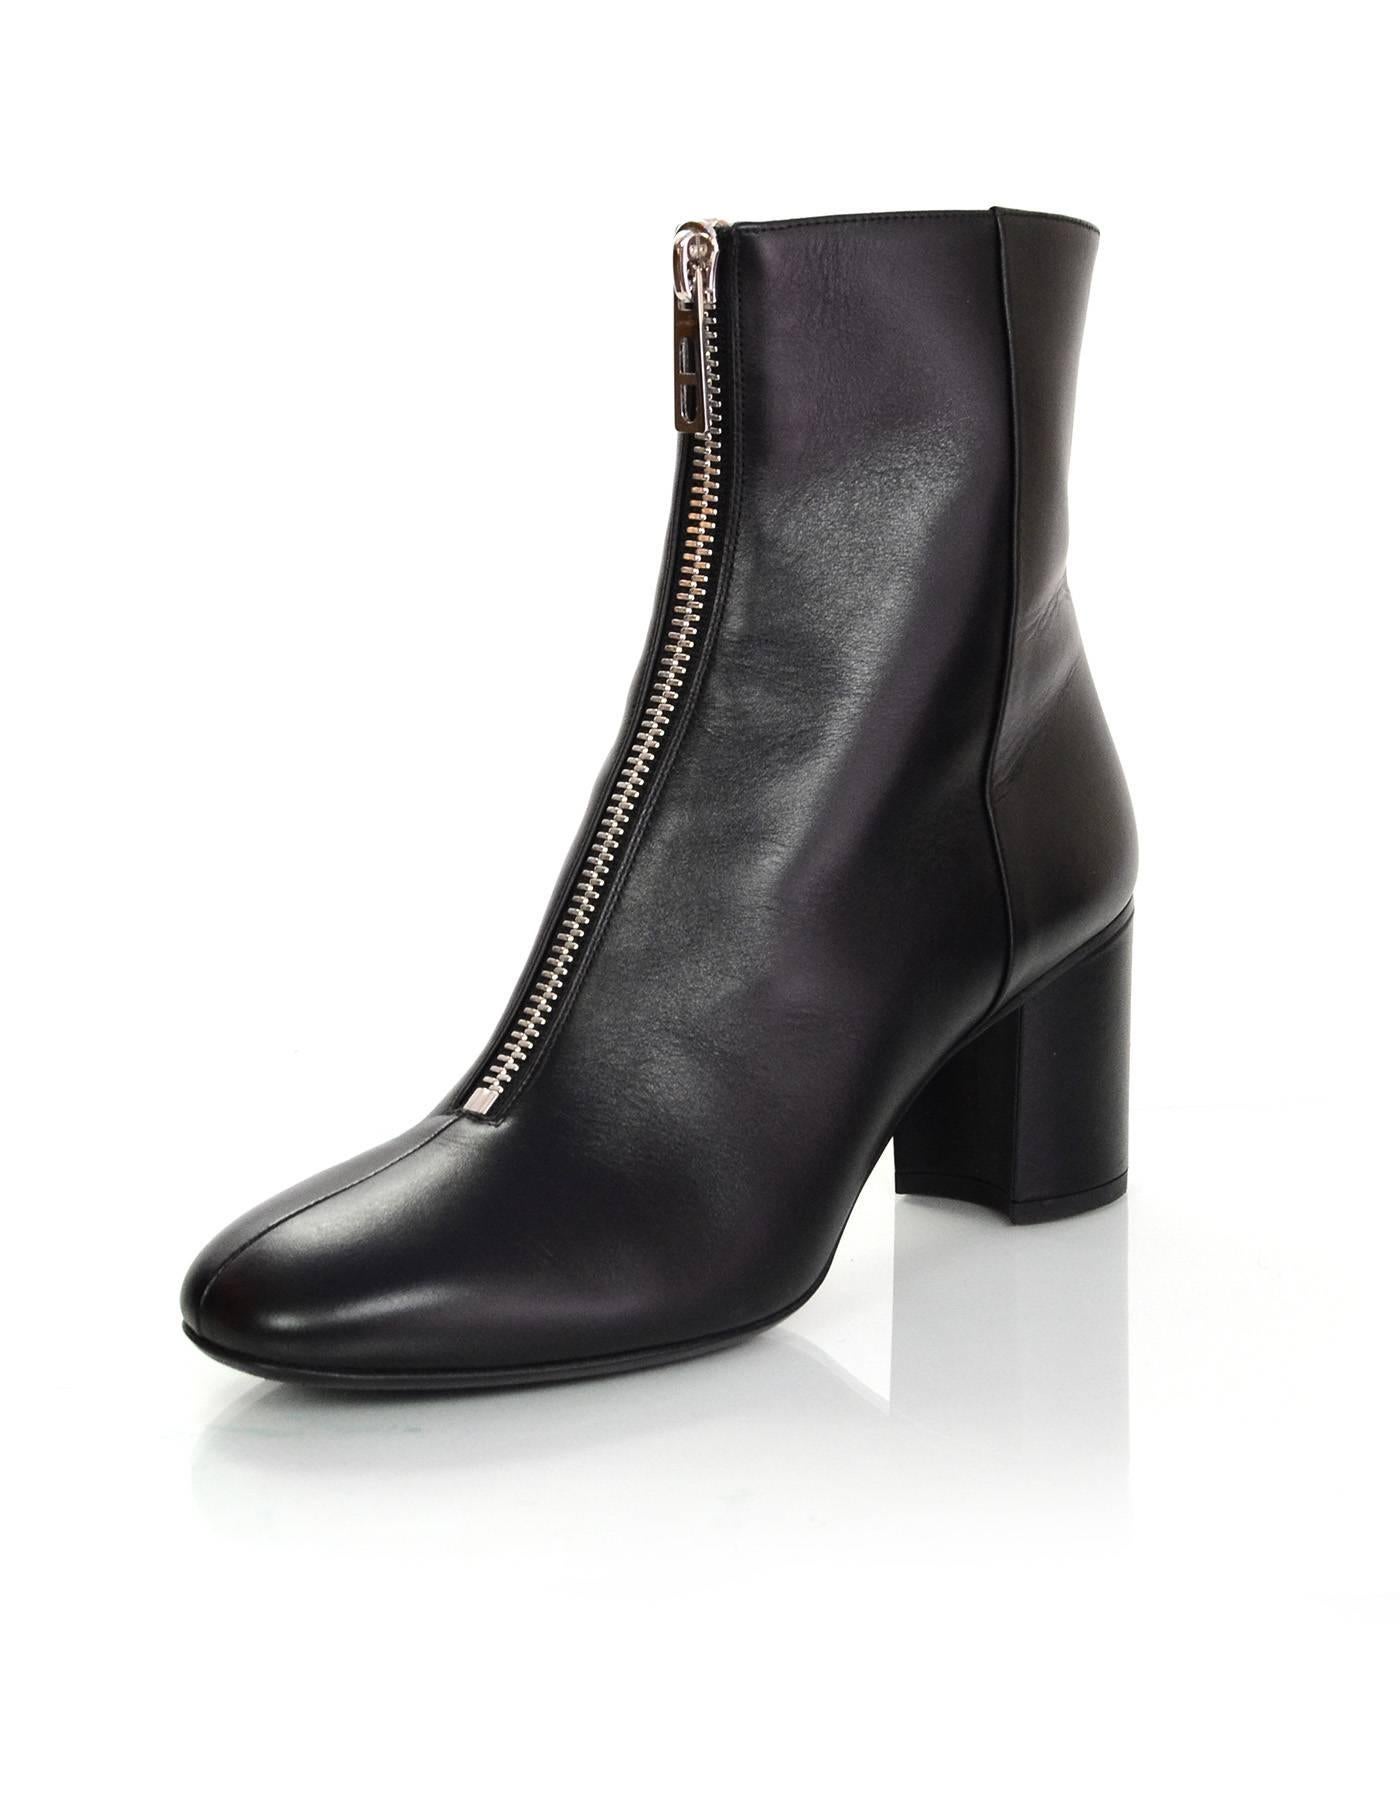 Hermes Black Leather New York 70 Zipper Ankle Boots Sz 38.5
Features front zipper with chain d'ancre zipper pull 

Made In: Italy
Color: Black
Materials: Leather
Closure/Opening: Zip closure at front
Sole Stamp: Hermes 38 1/2 Made in Italy
Retail